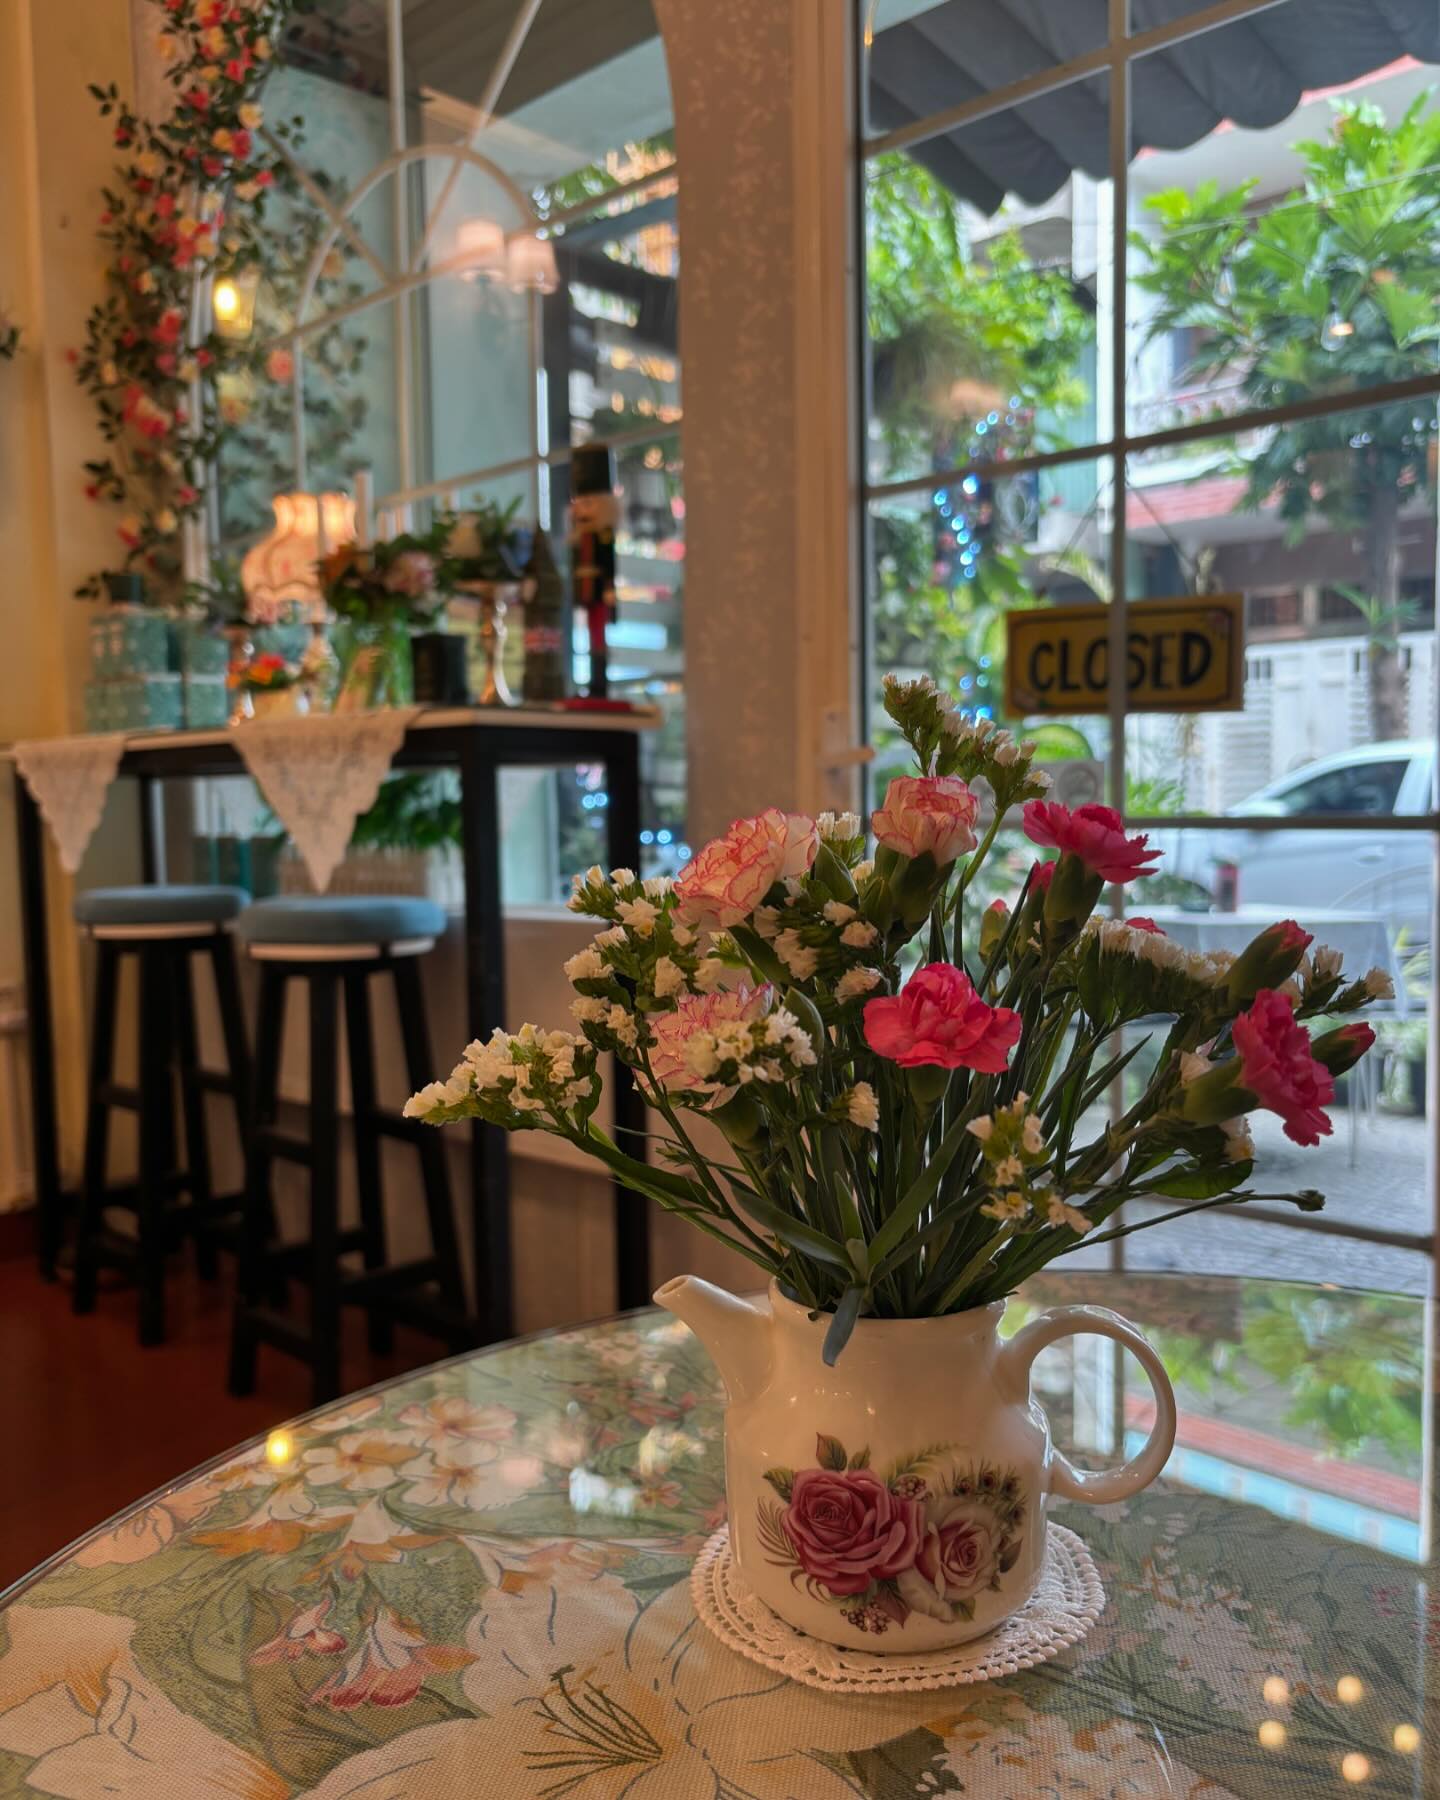 Was walking by and stumbled upon The Windsor Tea House in Da Nang! ✨ 
Who wants join me for some afternoon Tea and Crumpets? 🤣
Cozy vibes with chandeliers and comfy chairs from grandmas house. Plus, their passion fruit cheesecake and scones are delicious!
#DaNangSurprise #TeaTimeTreats #TheWindsorTeaHouse